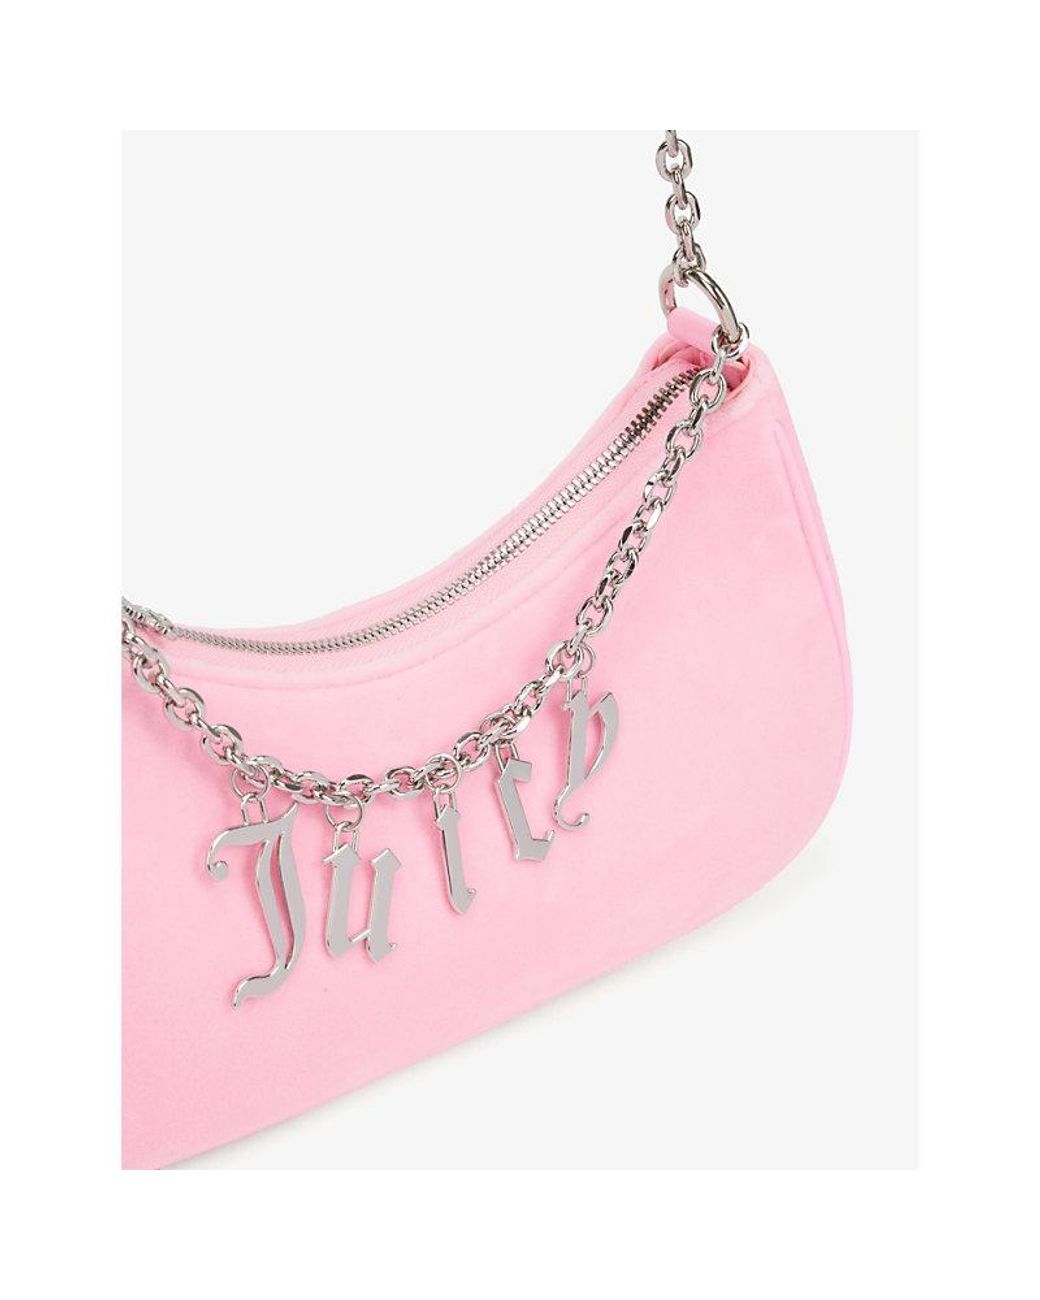 Juicy Couture Pink Purse Bag With Shoulder Strap